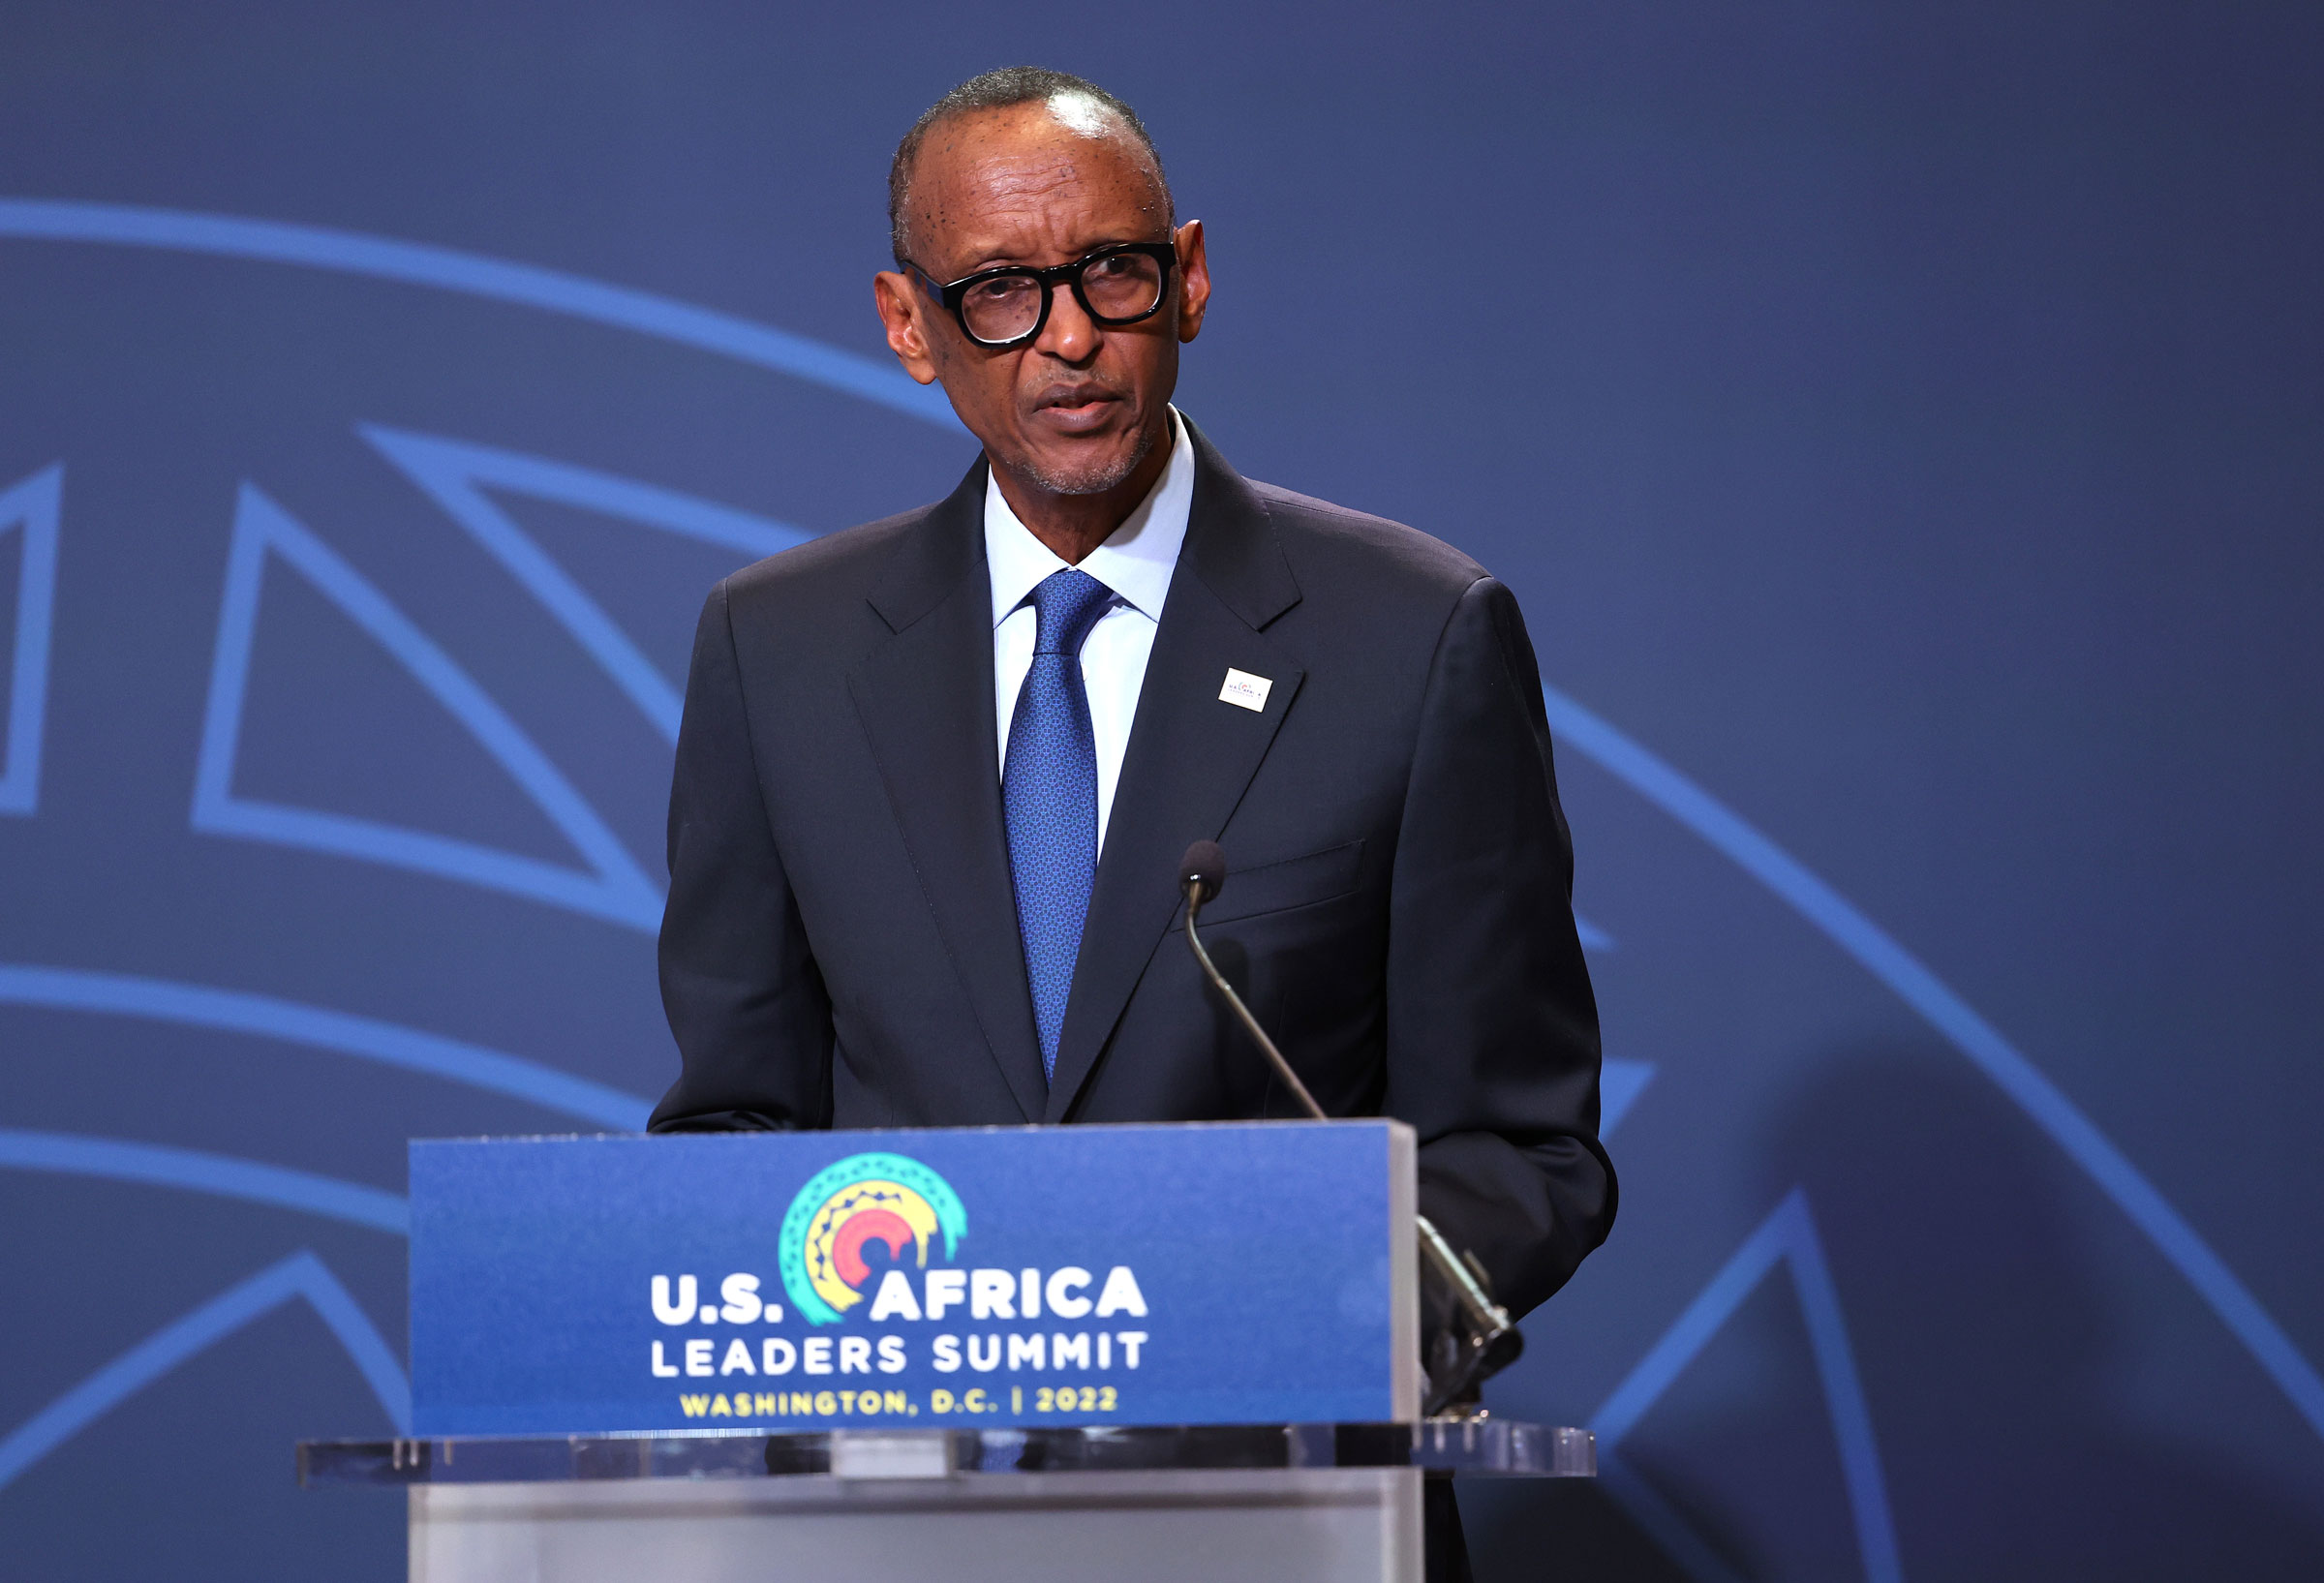 Rwandan President Paul Kagame insisted that instability and violence in eastern Democratic Republic of Congo is not Rwanda’s concern, despite them being neighbouring countries and Kigali being accused of supporting the M23 Tutsi rebel group.